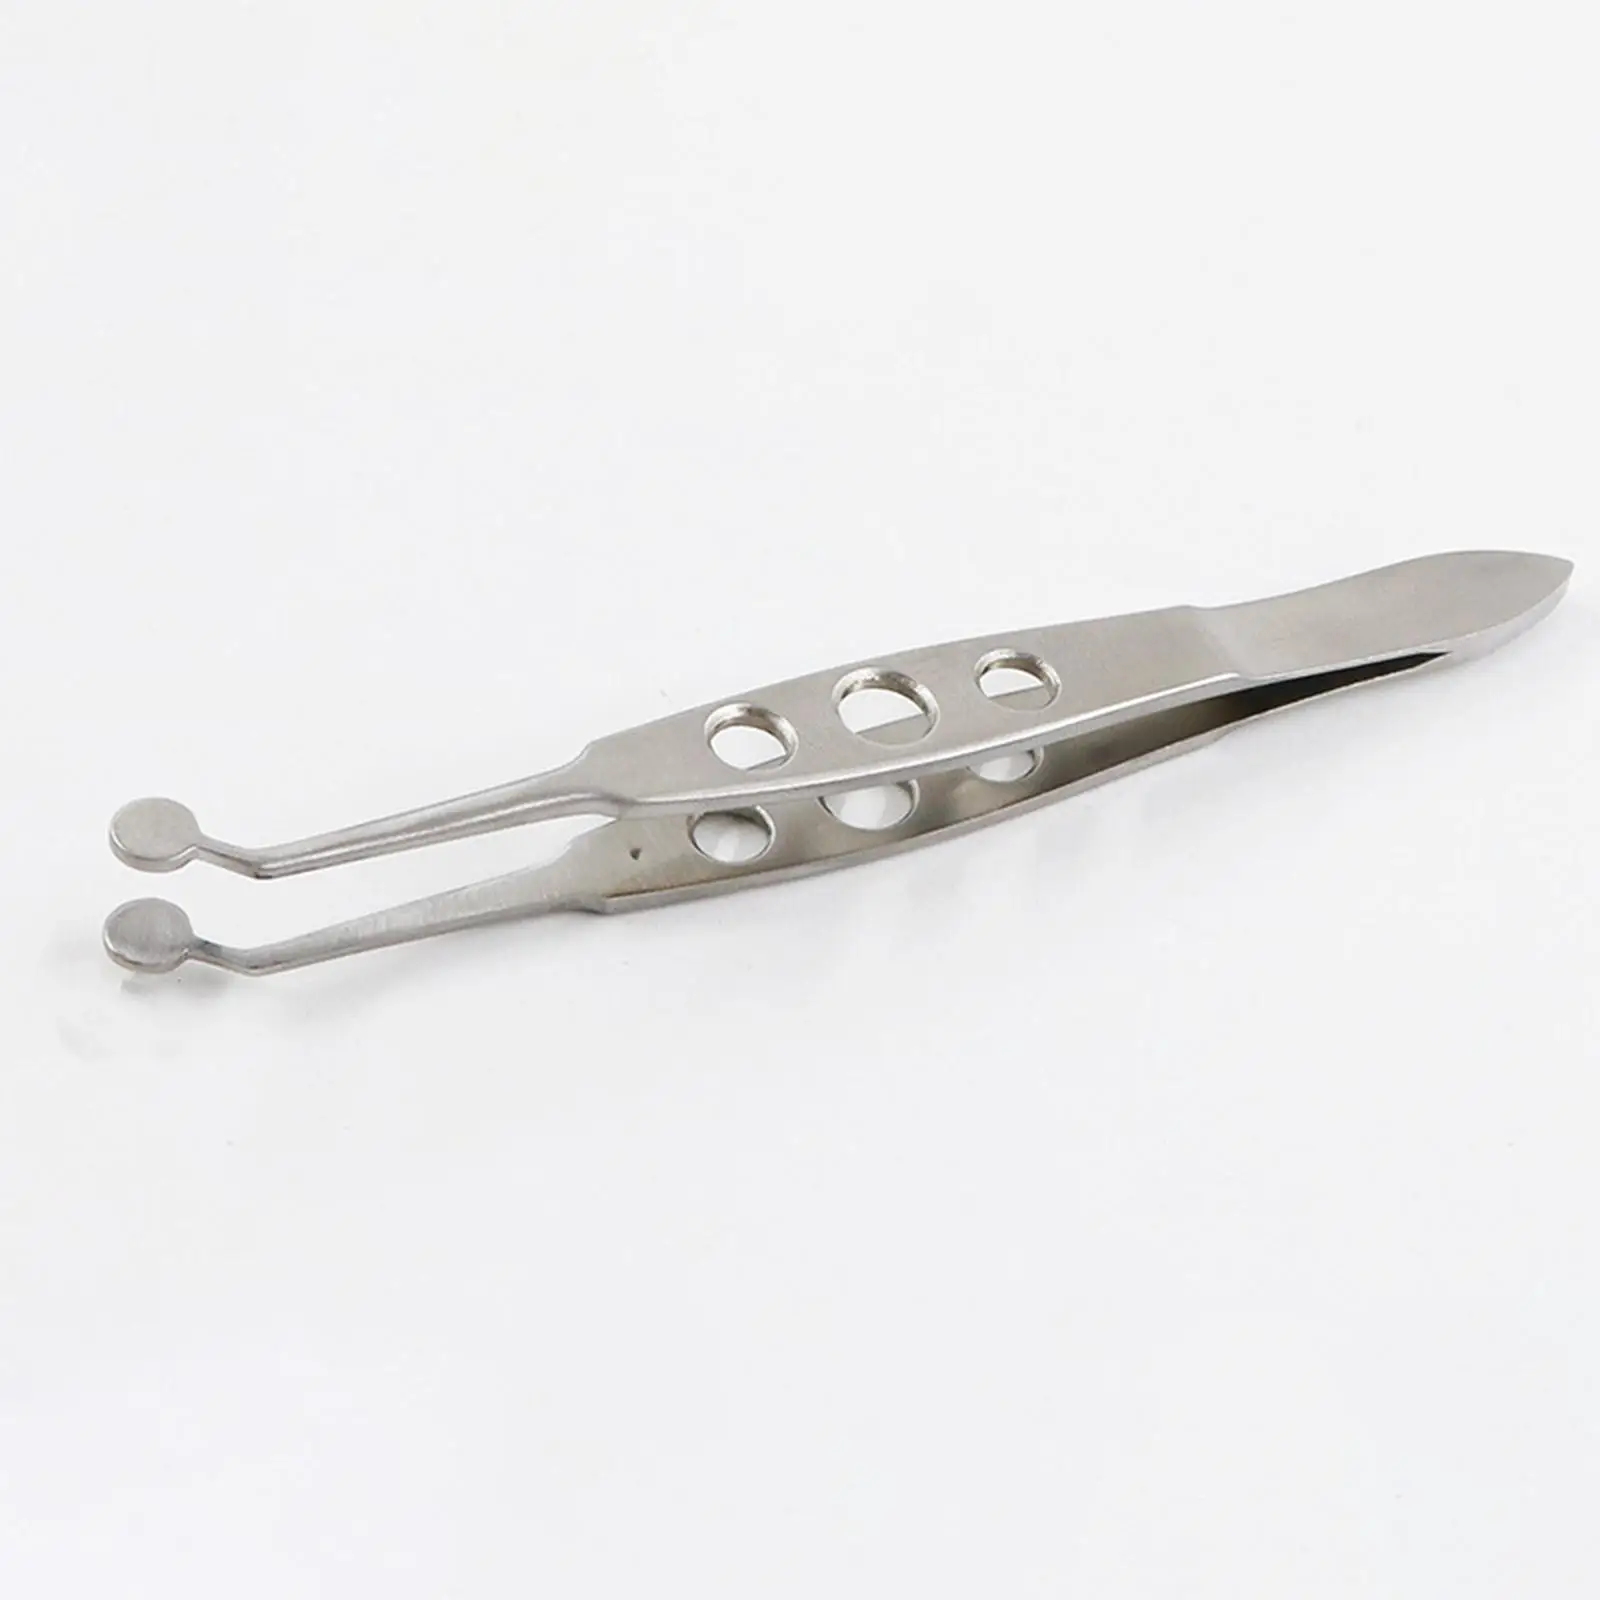 Meibomian Gland Forceps Stainless Steel Ophthalmological Clamp for Palpebral Gland Massage